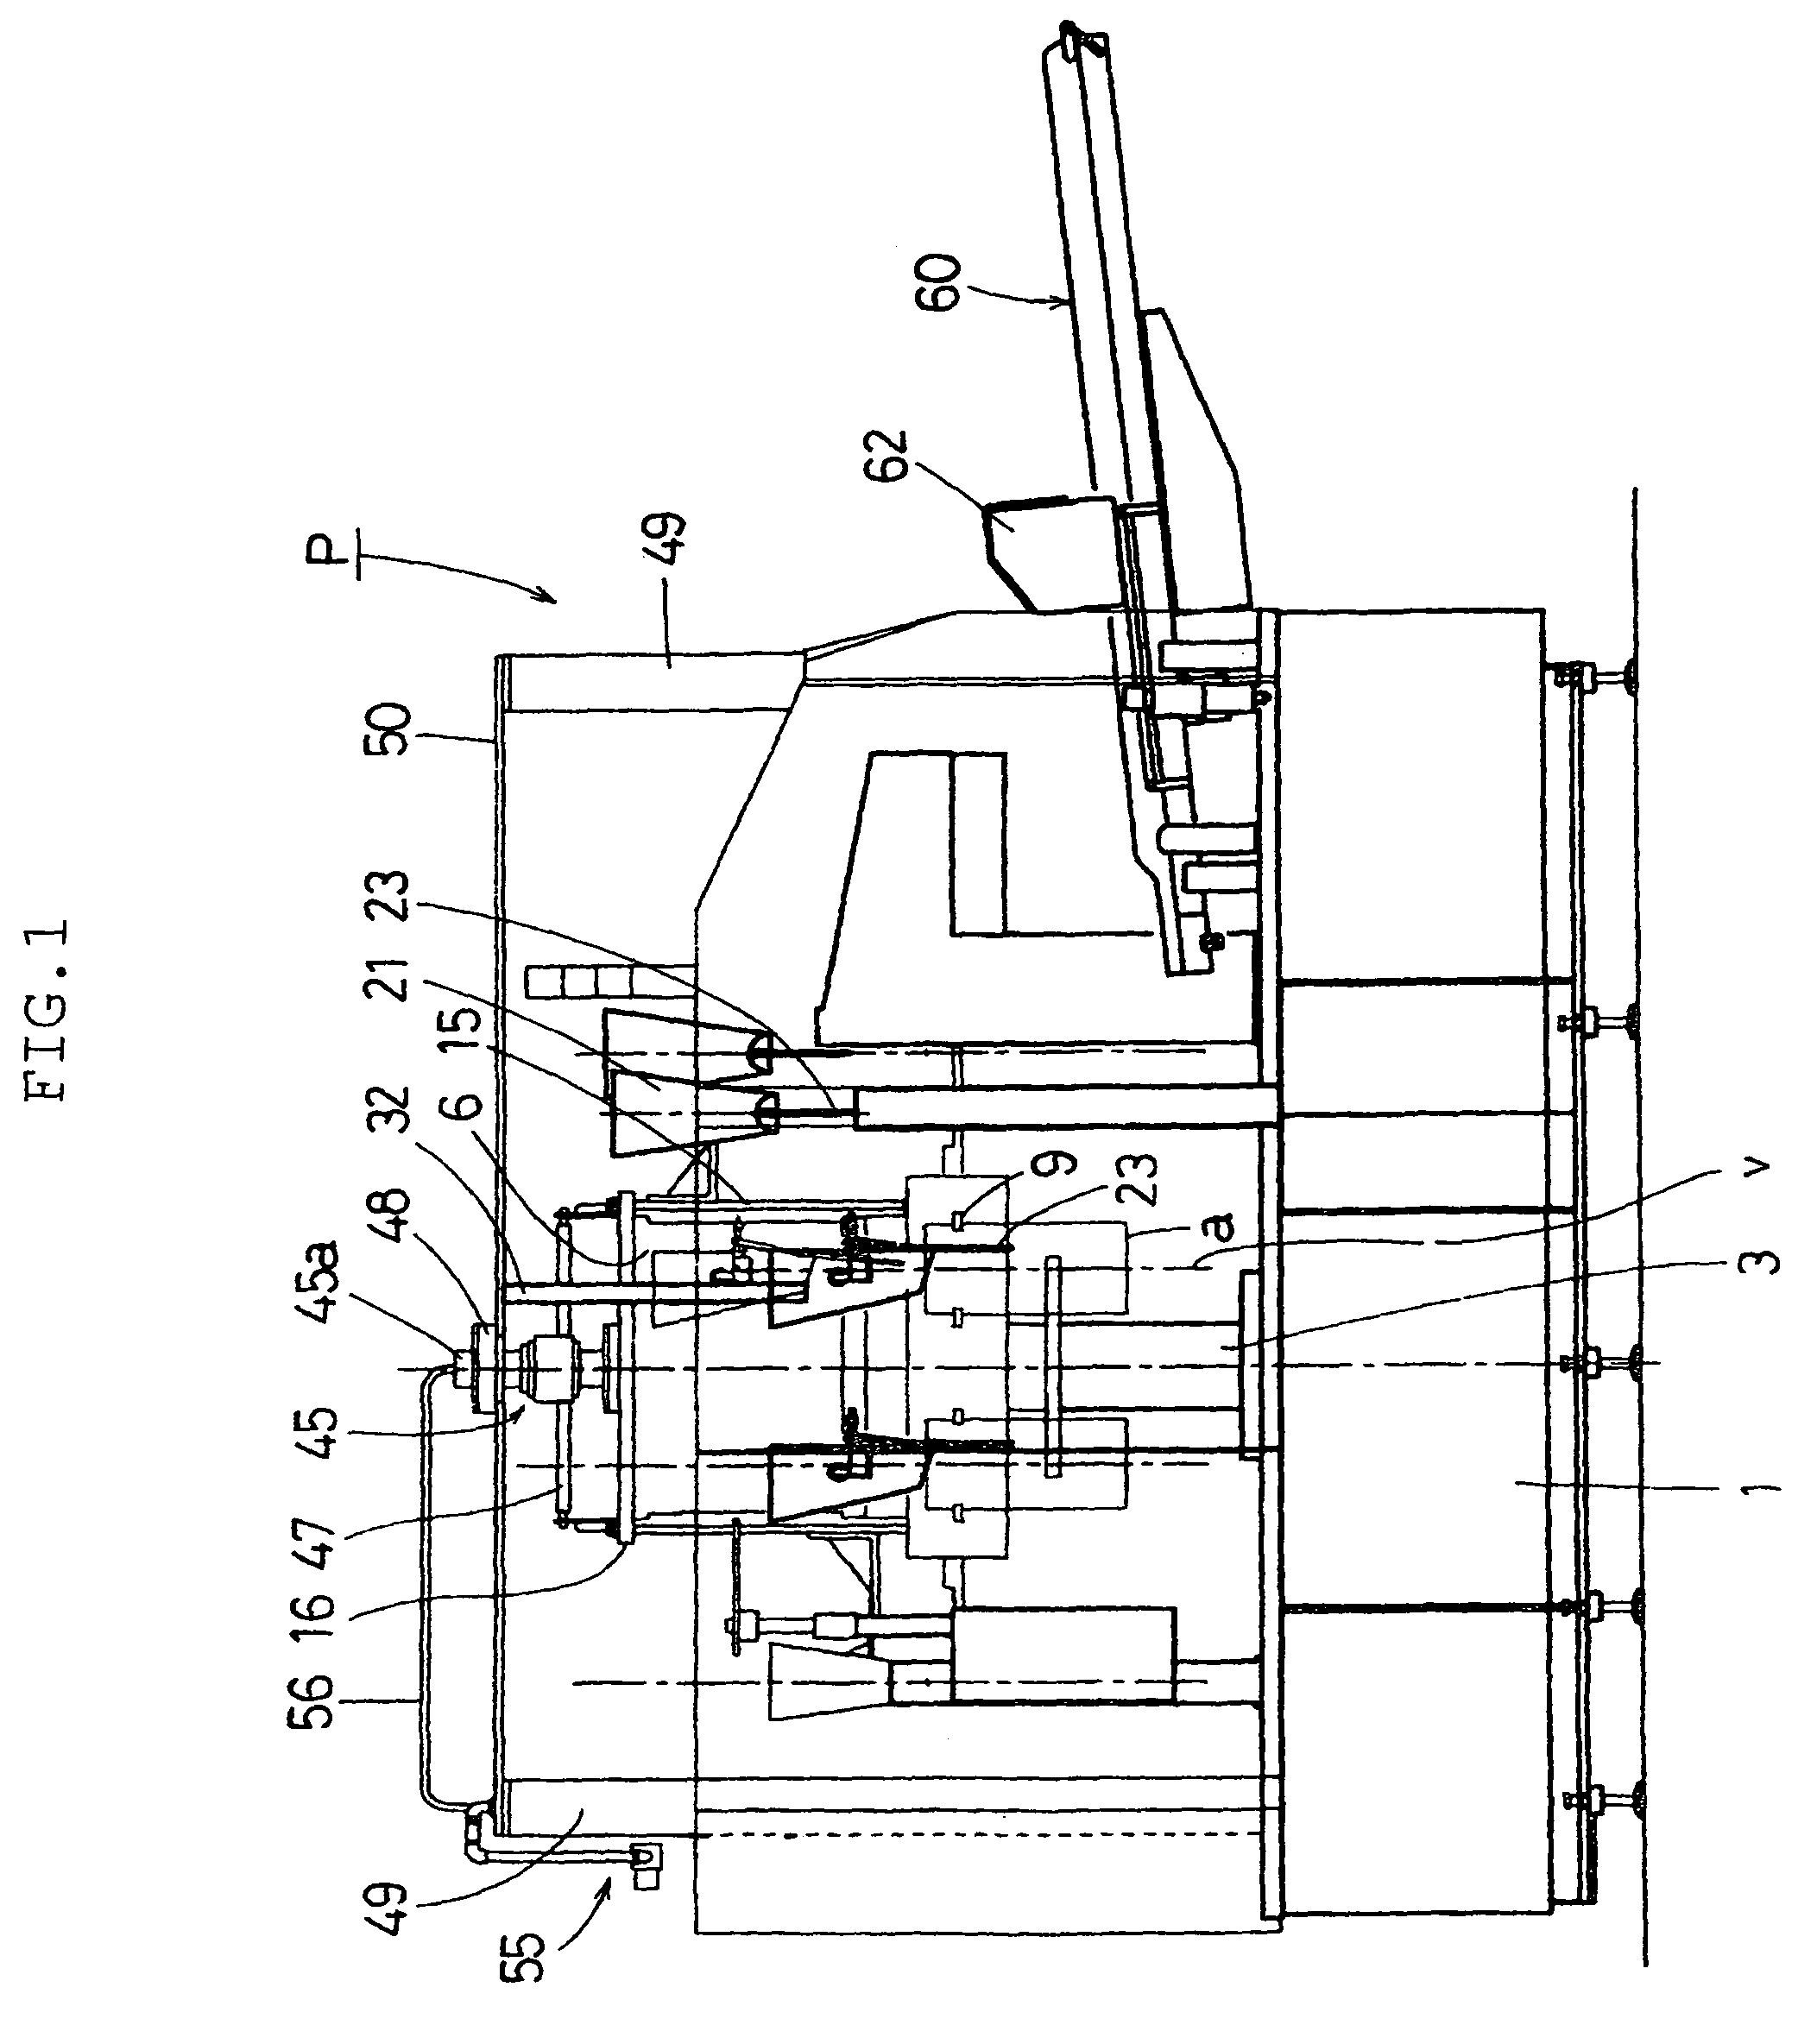 Method for placing inert gas in gas-filling packaging machine